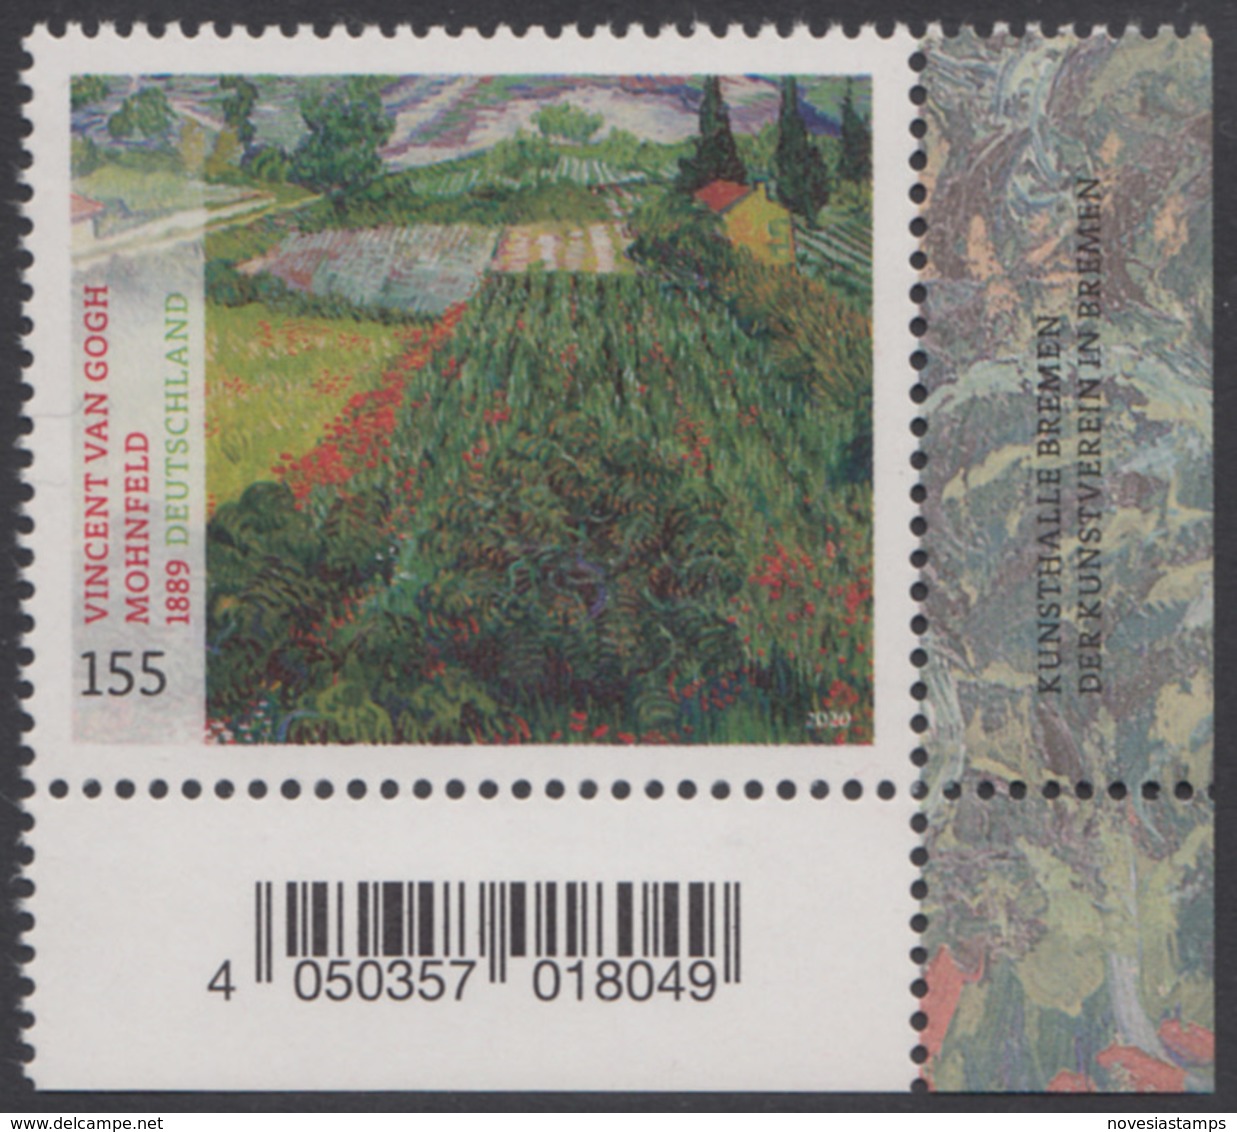 !a! GERMANY 2020 Mi. 3512 MNH SINGLE From Lower Right Corner - Vincent Van Gogh: Poppy Field - Unused Stamps